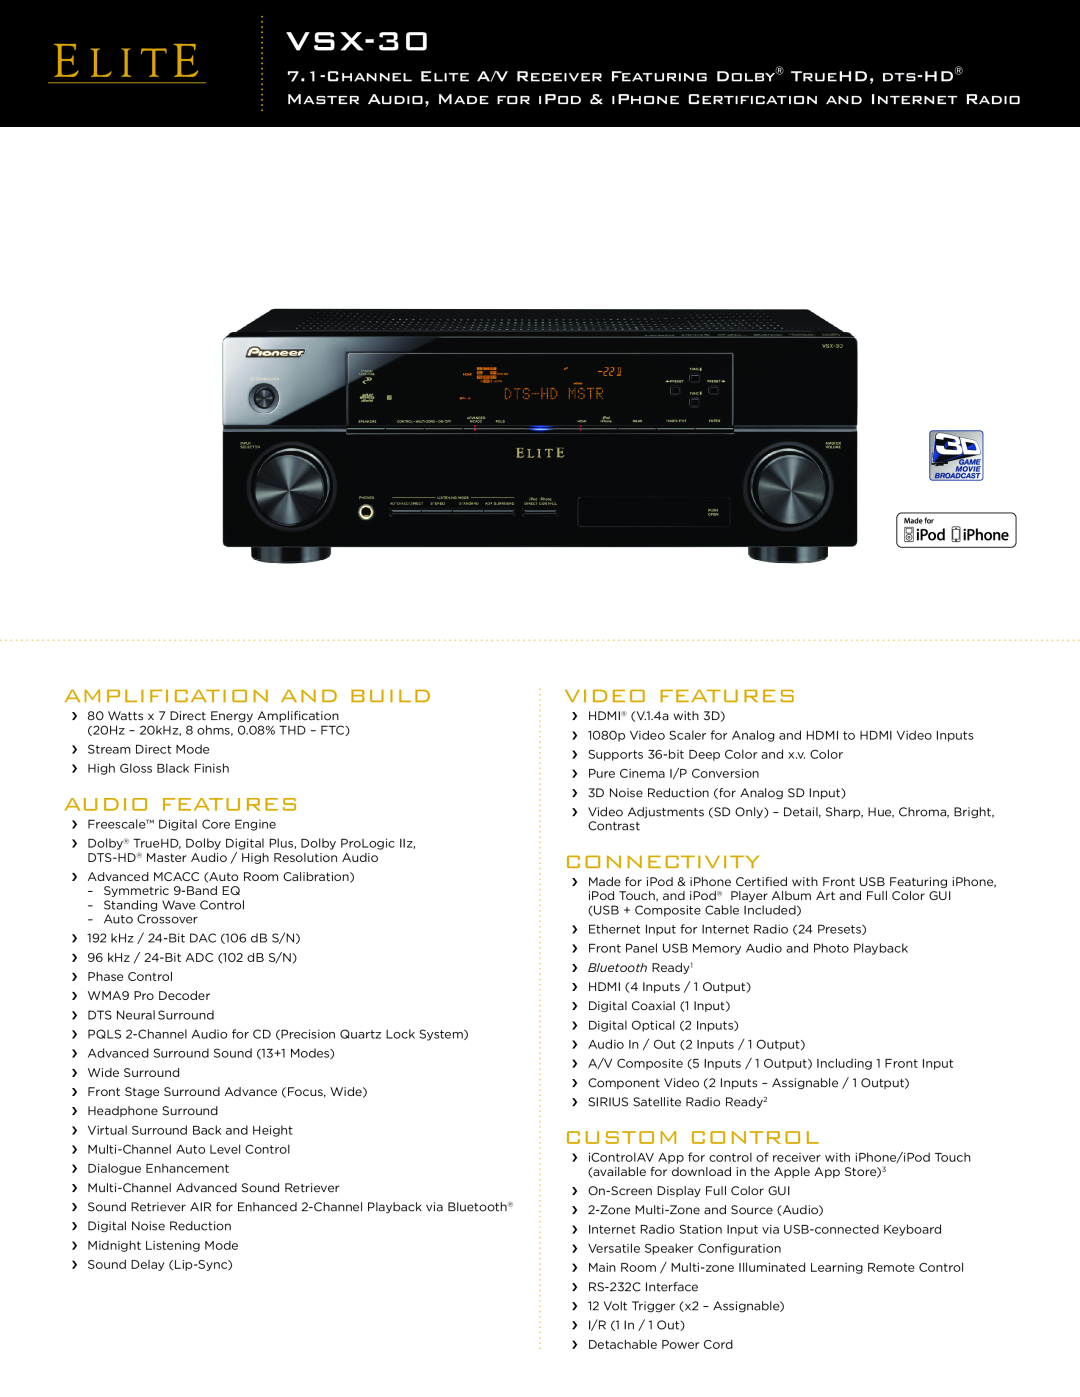 Pioneer VSX-30 manual Amplification And Build, Audio Features, Video Features, Connectivity, Custom Control 